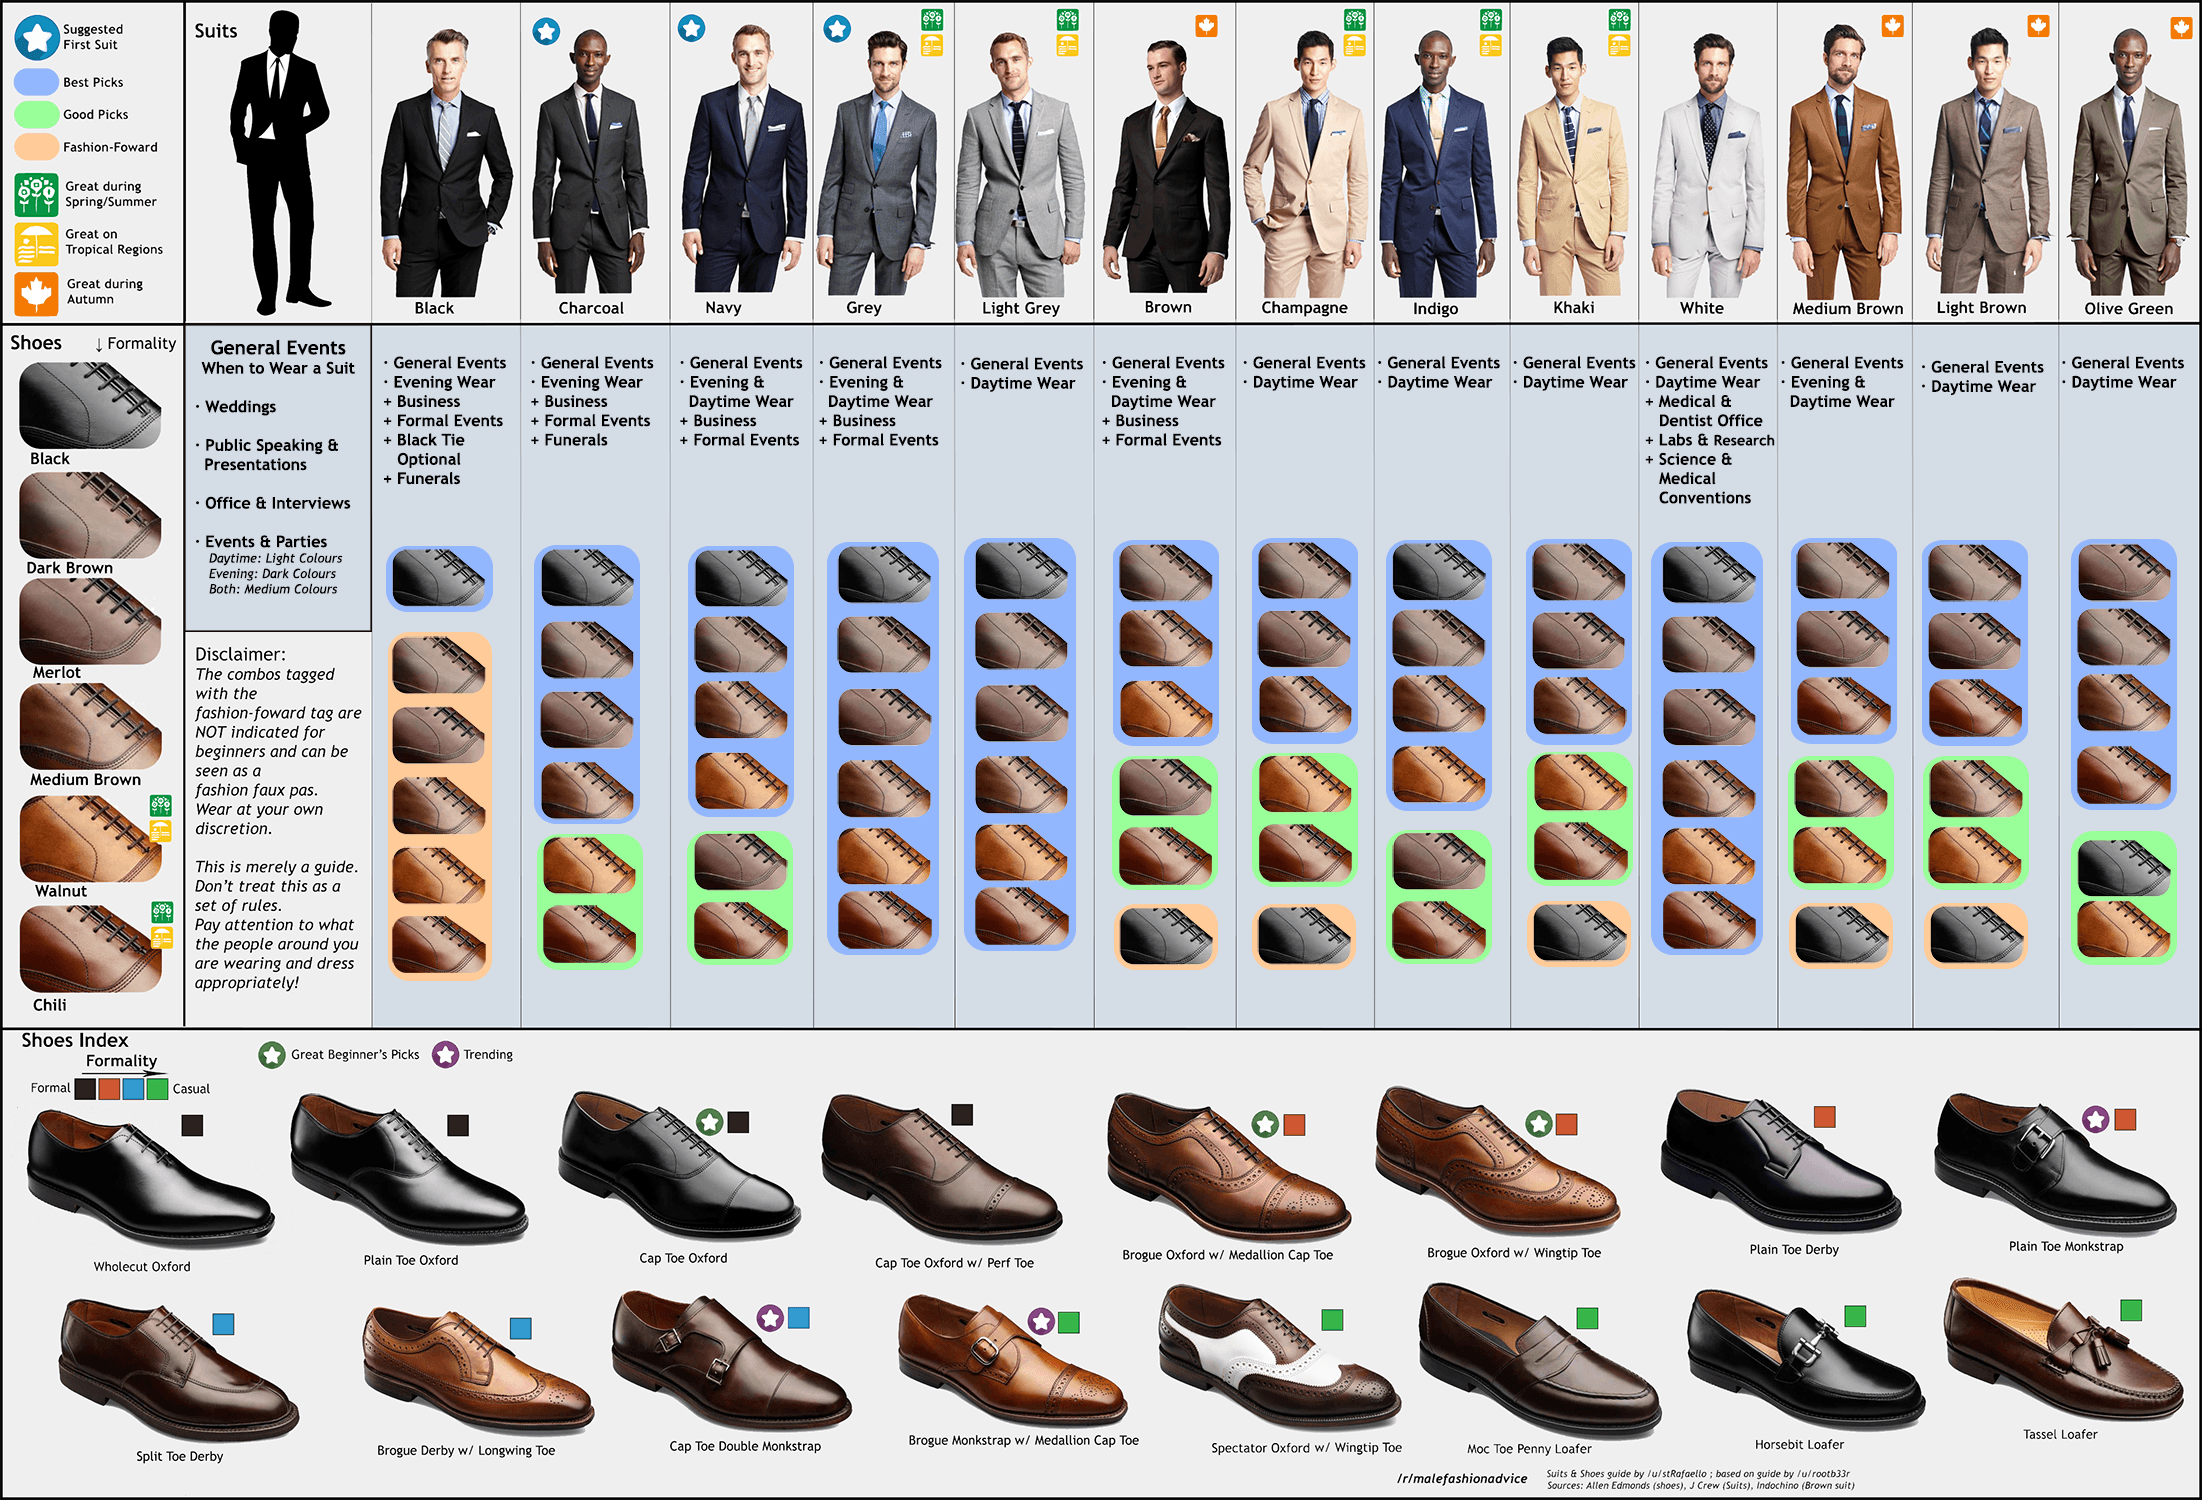 How to match suits to your suit